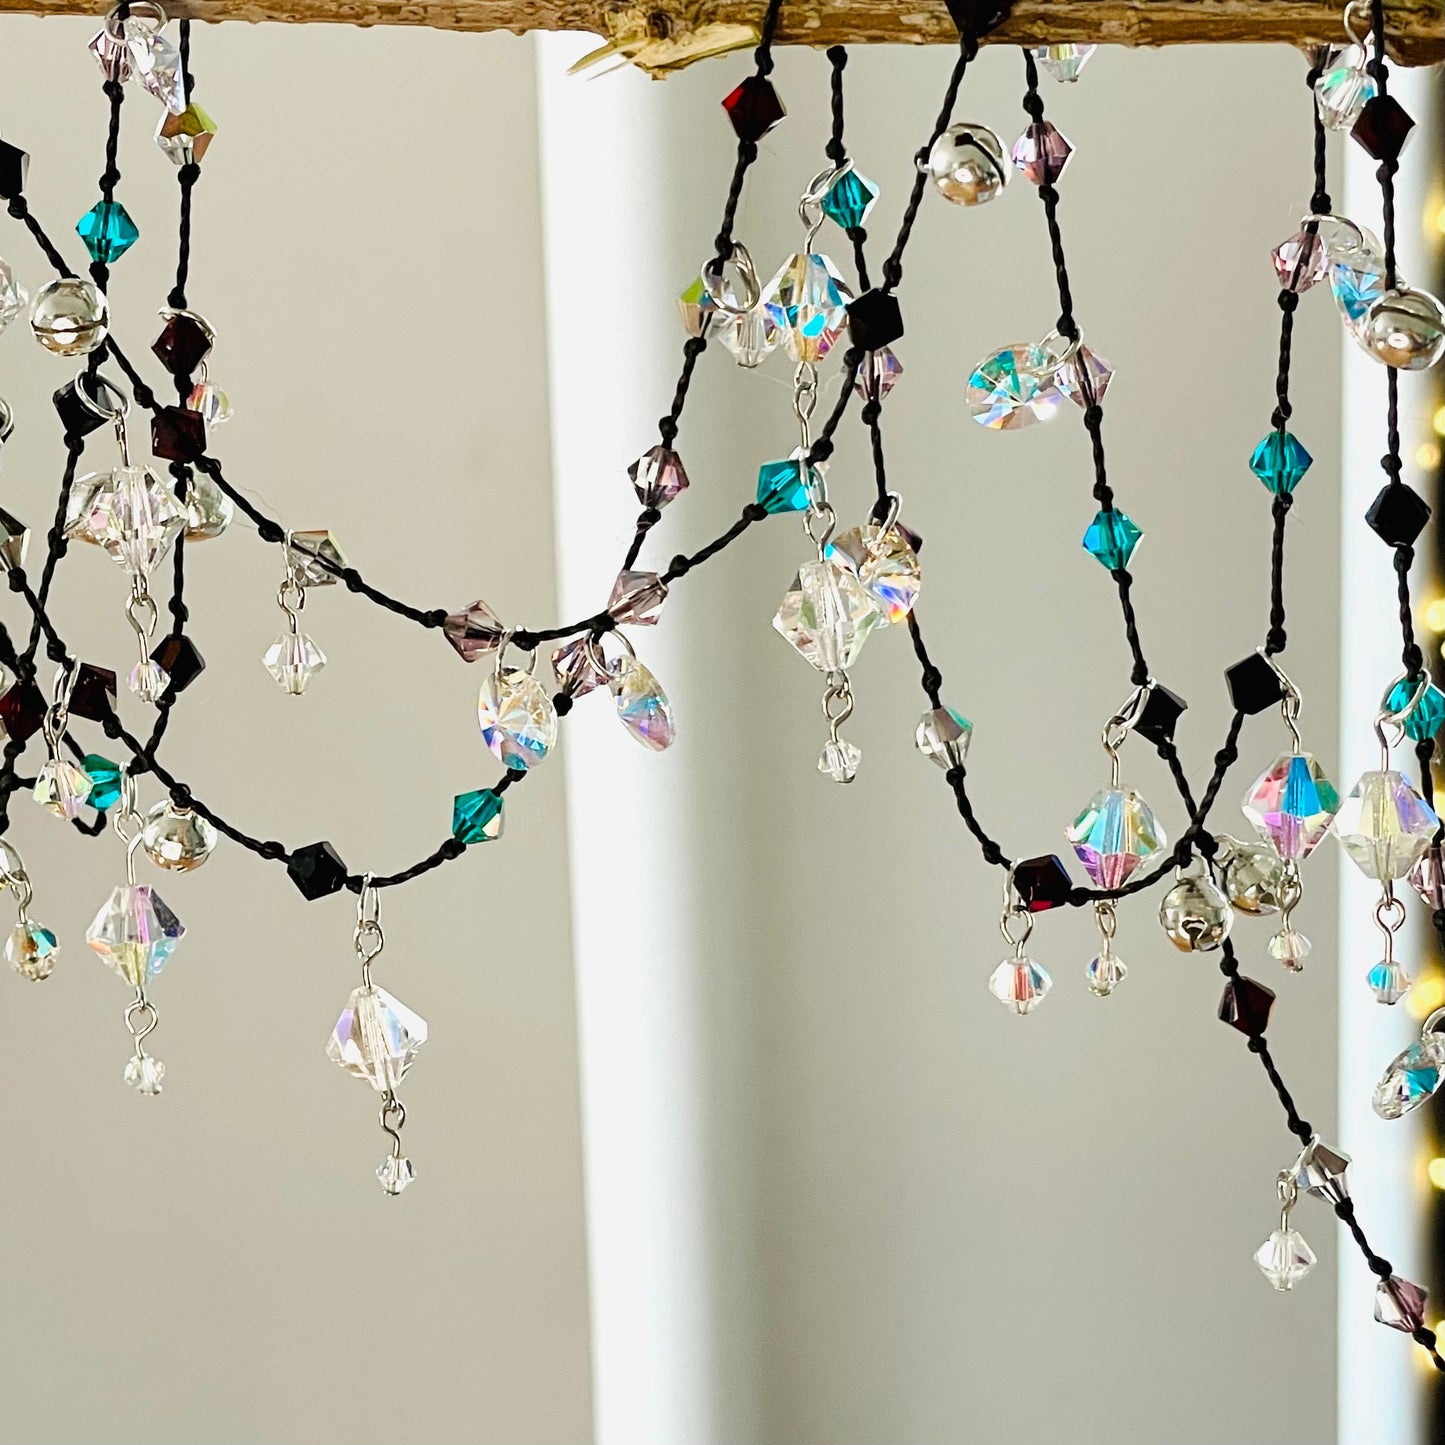 Art Deco 2-Meter Christmas Garland with Crystal Beads, Pendants, Silver, Emerald, and Pink Accents - Handmade Festive Decor